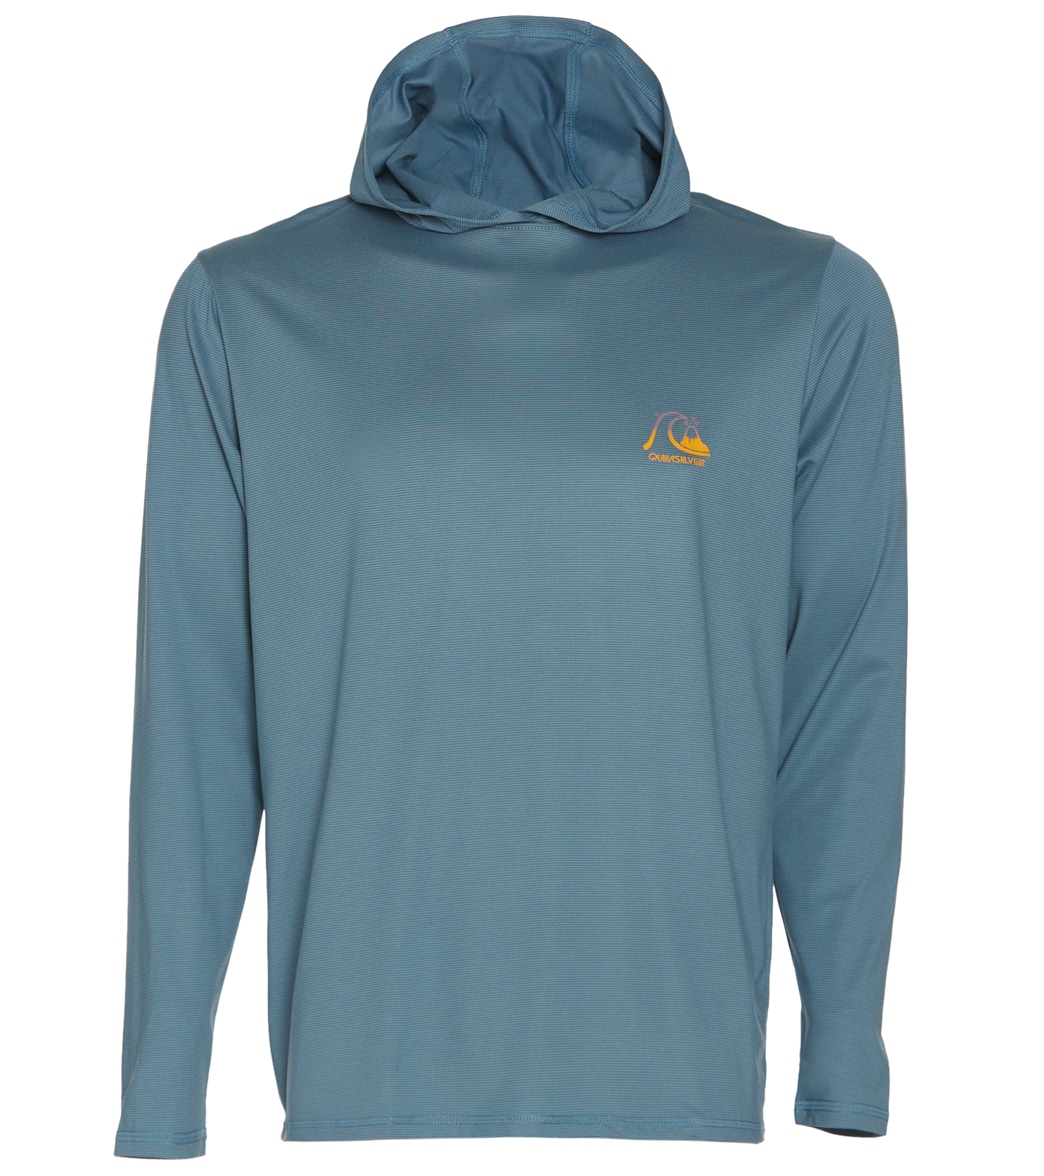 Quiksilver Men's Dredge Hooded Long Sleeve Upf 50 Surf Shirt - Provincial Blue Heather Small Size Small Cotton/Polyester - Swimoutlet.com